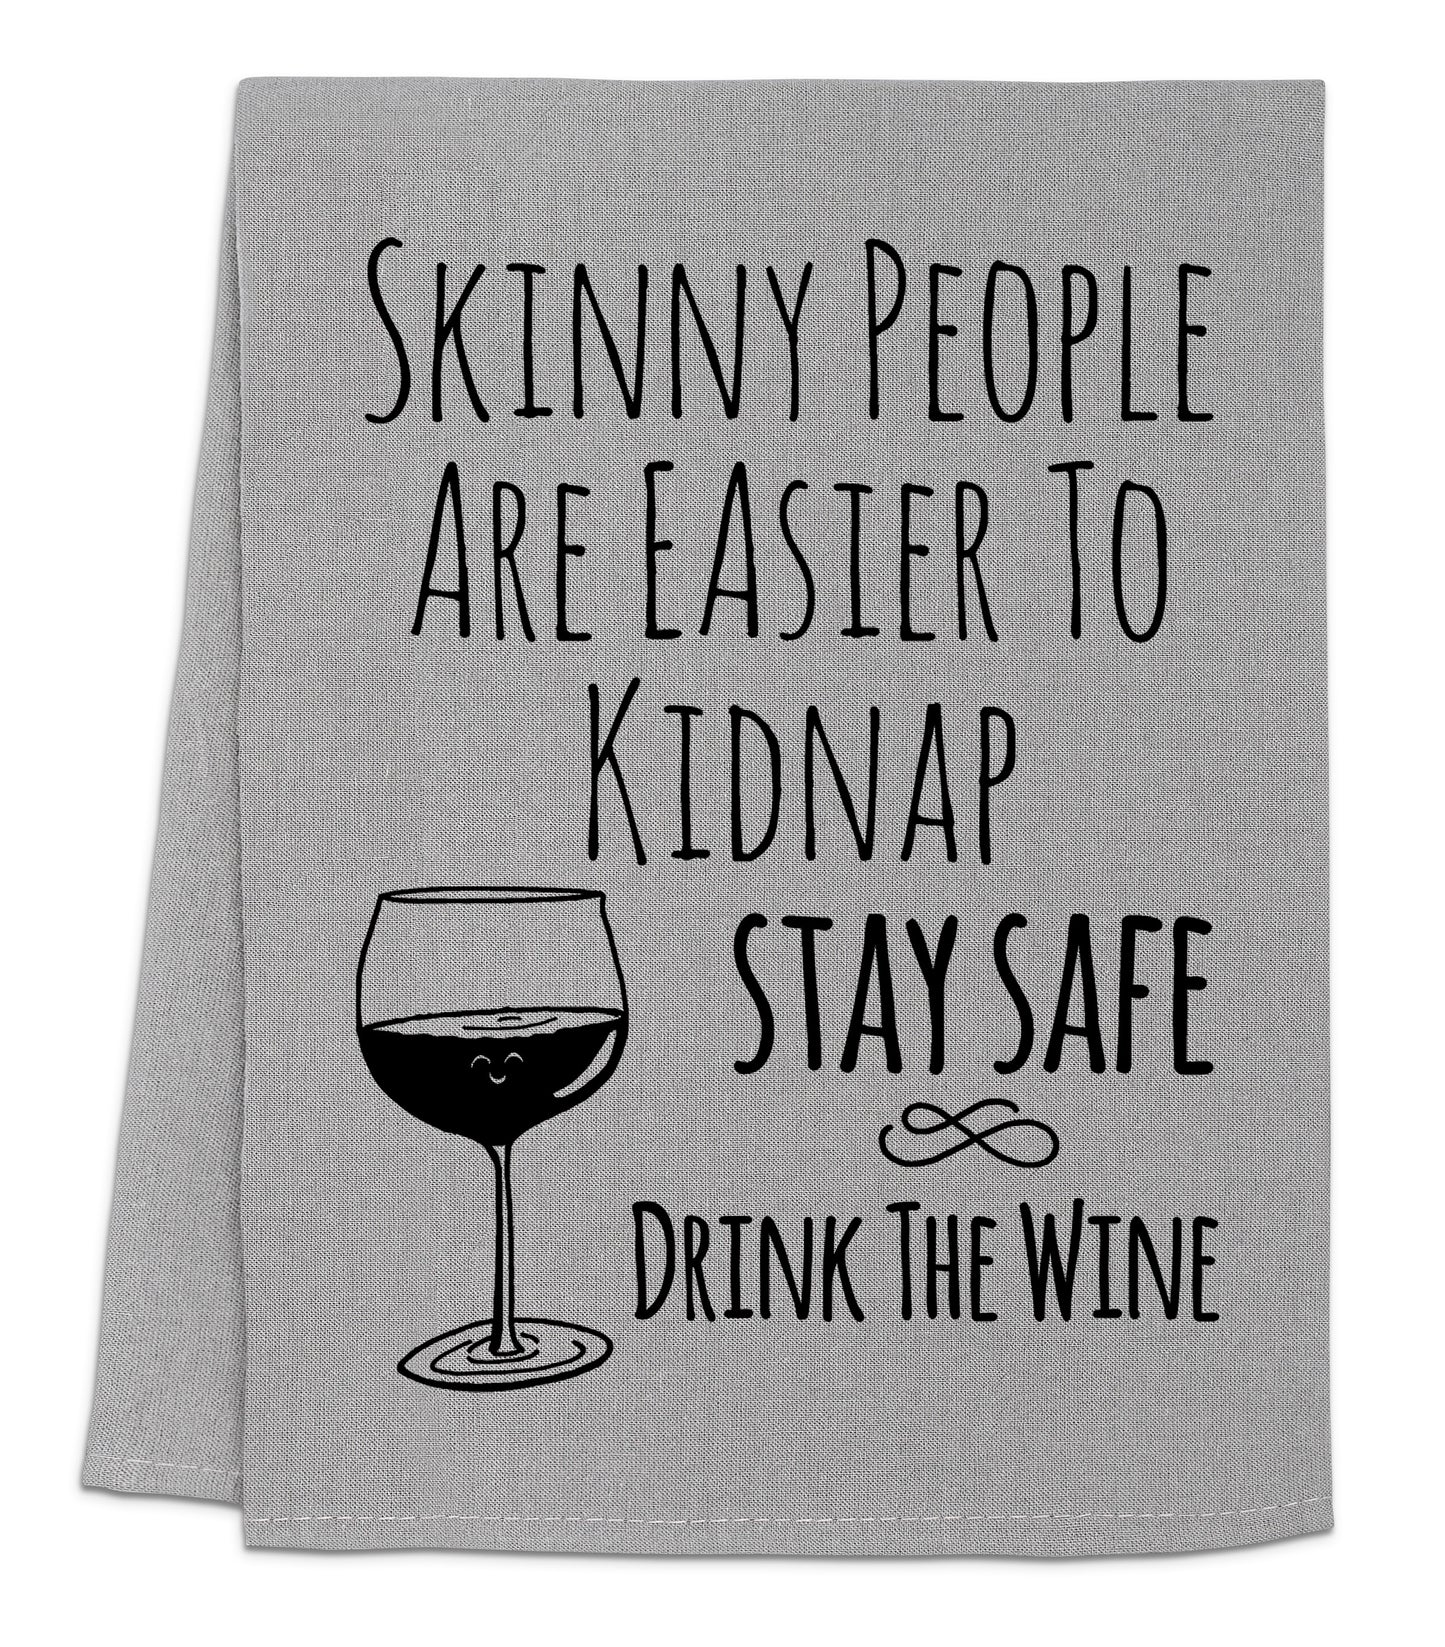 a towel that says skinny people are easier to kidnapped stay safe drink the wine